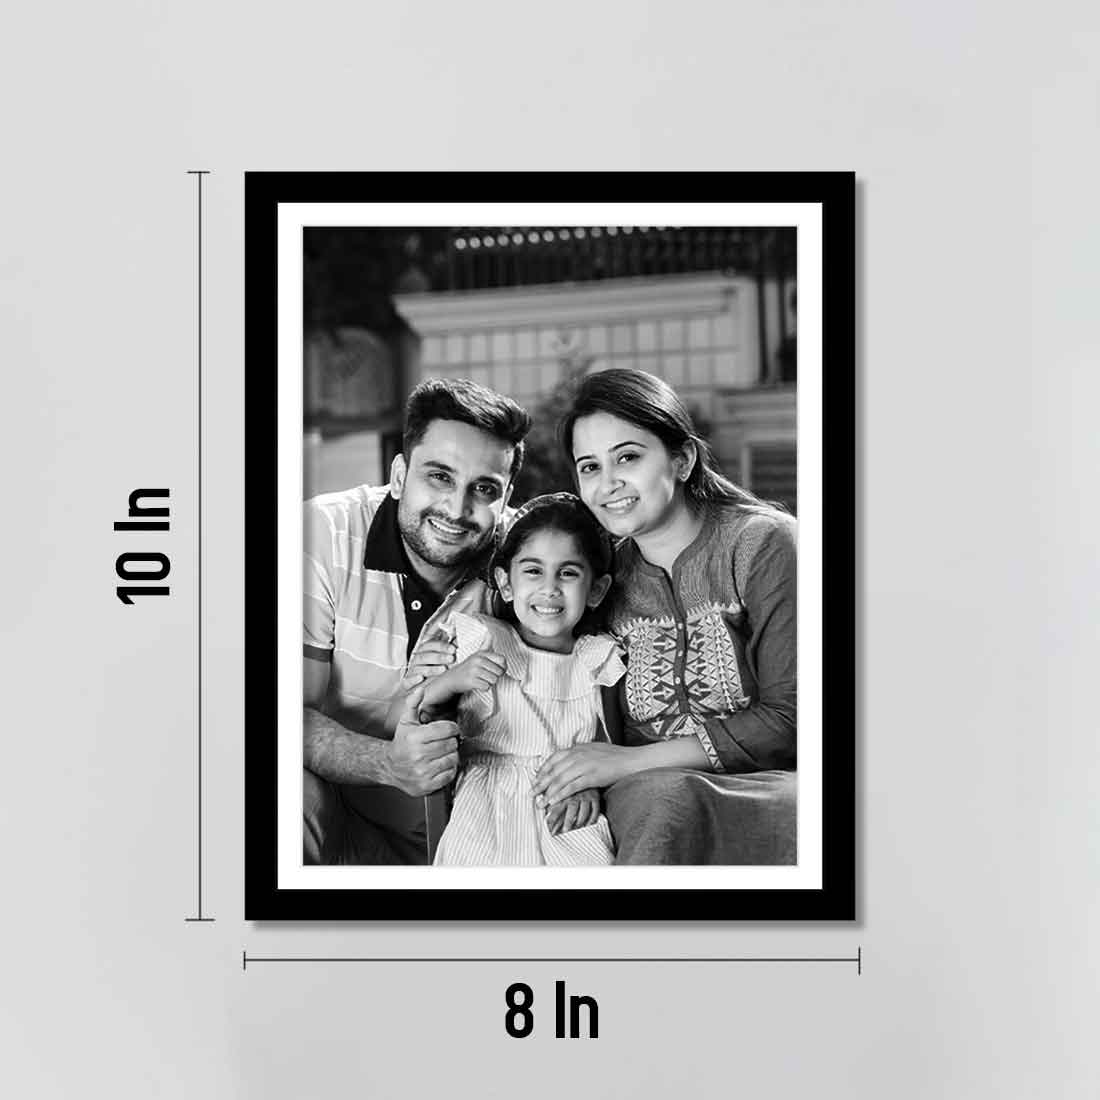 Black and White Frame for Wall Custom Picture Frame 8x10 Inch (Set of 3)